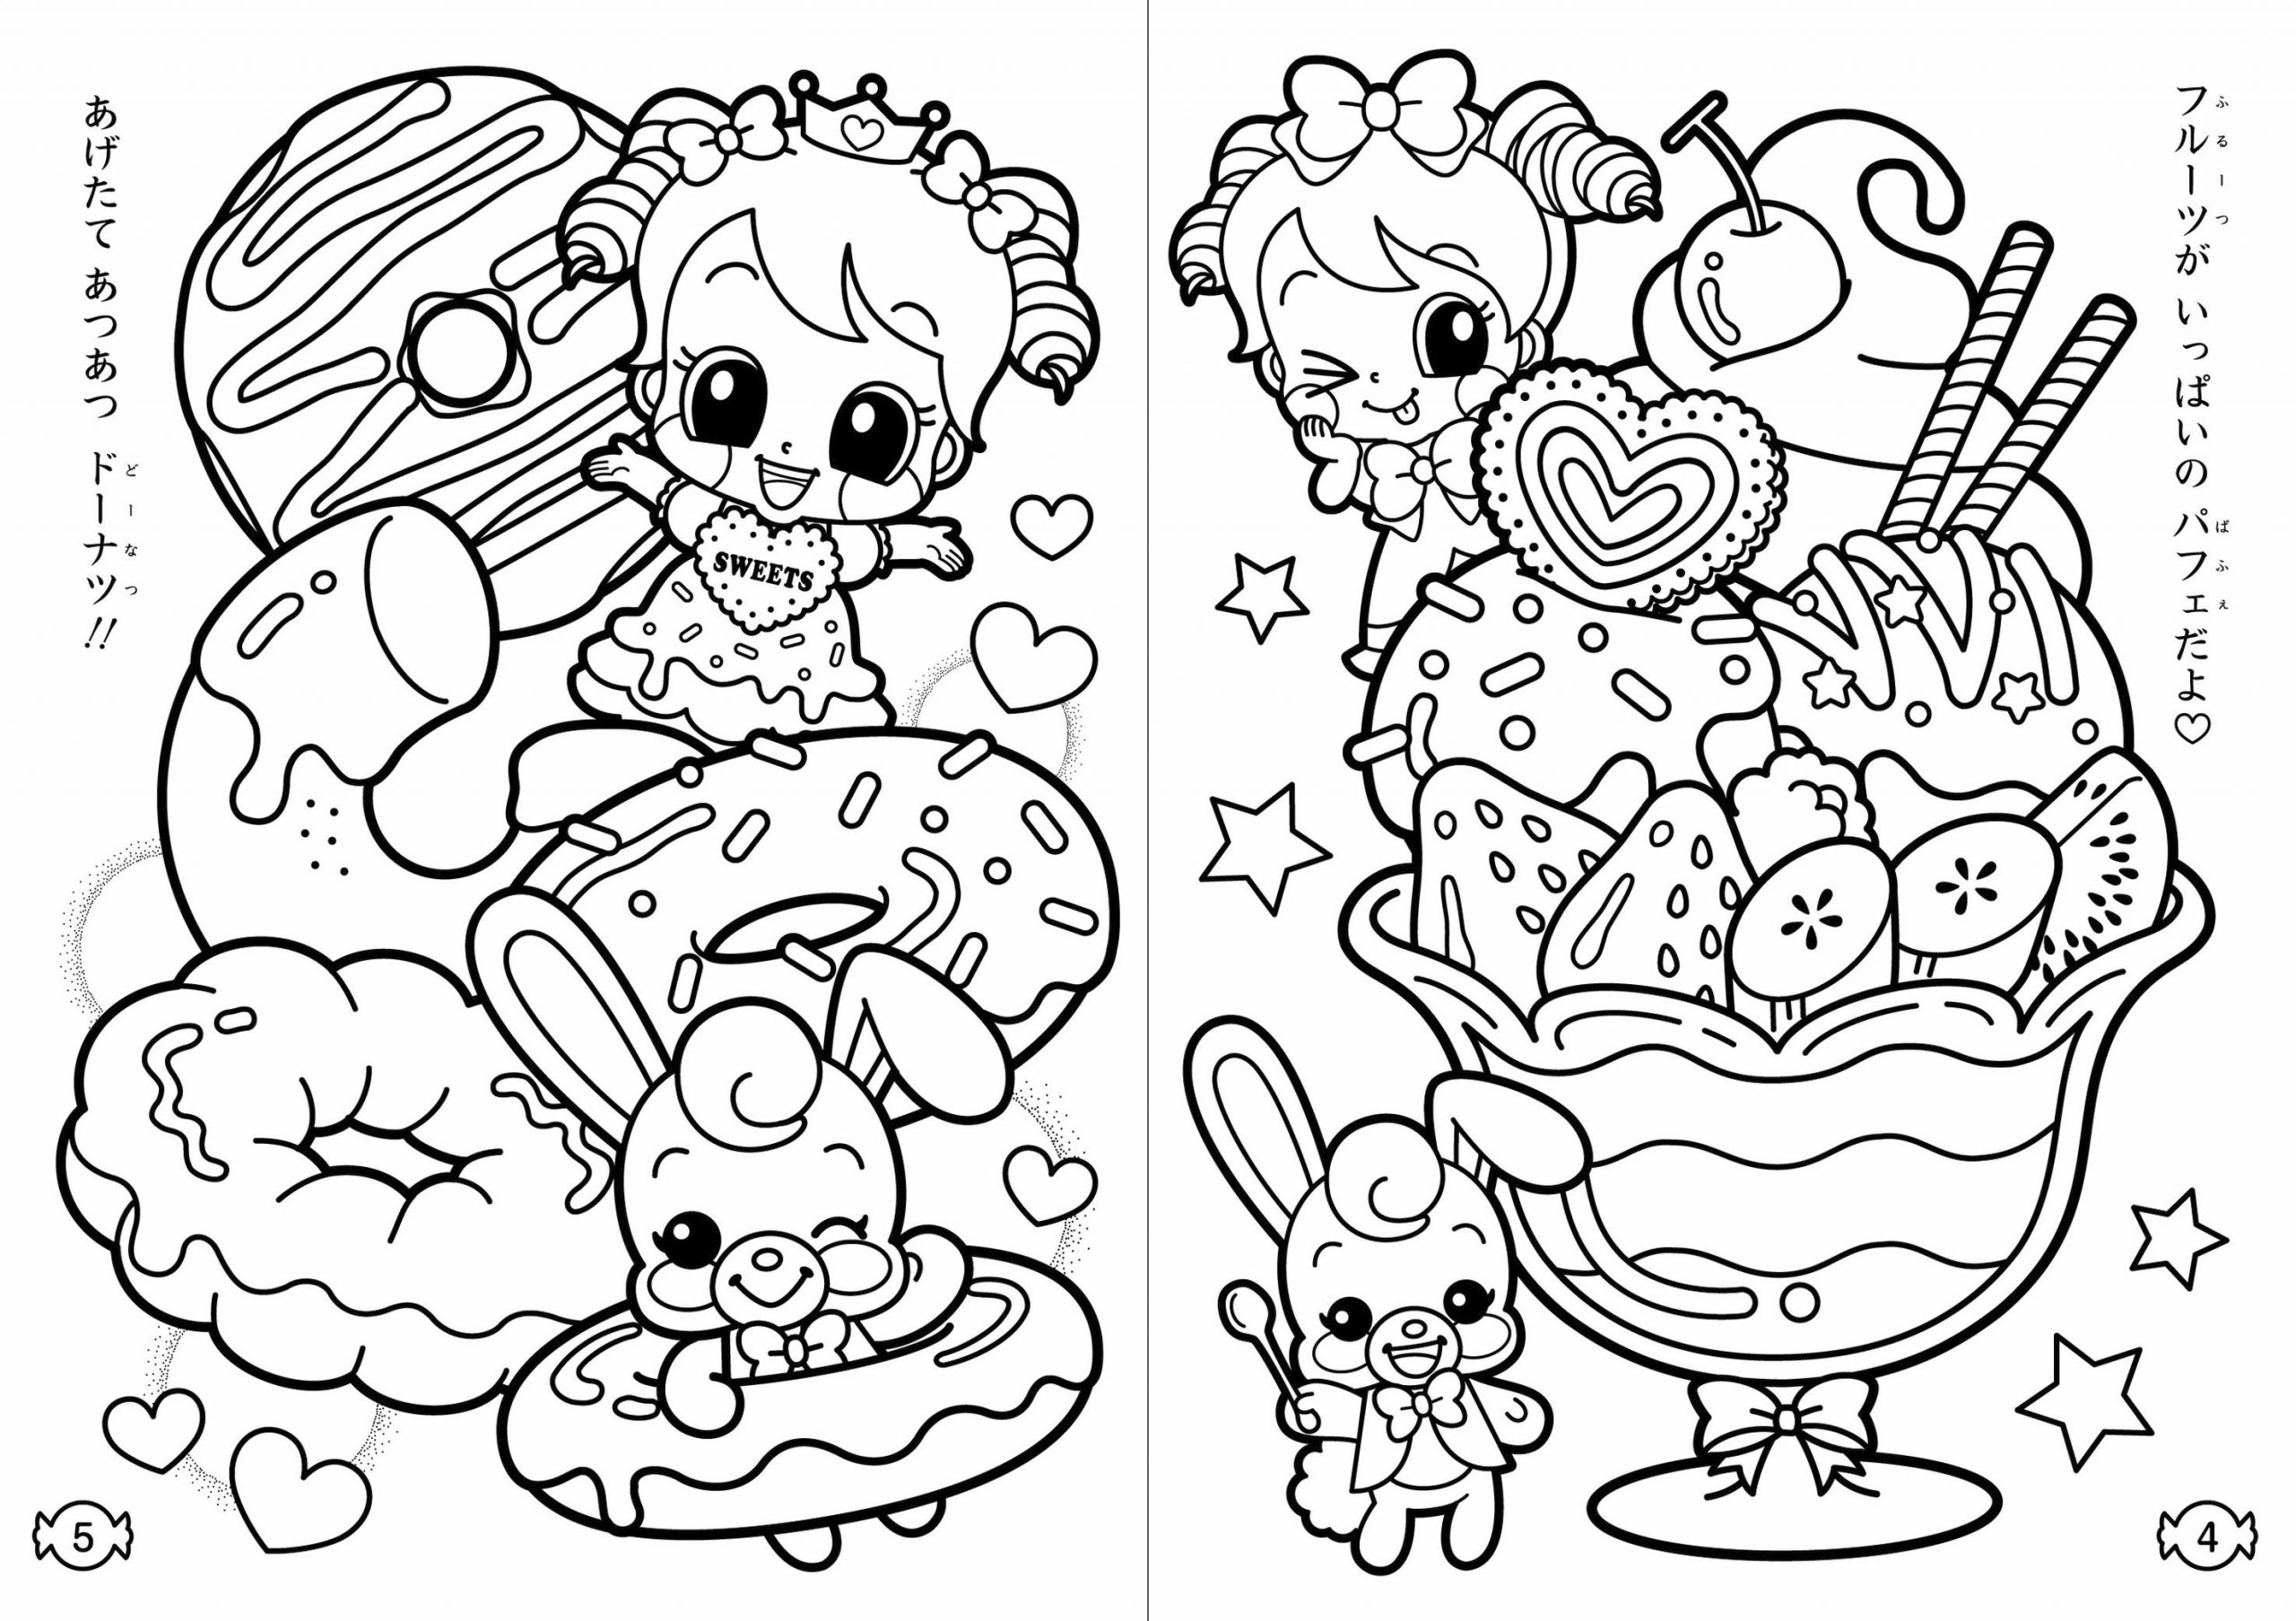 Get This Adorable Cute Little Girl Kawaii Coloring Pages